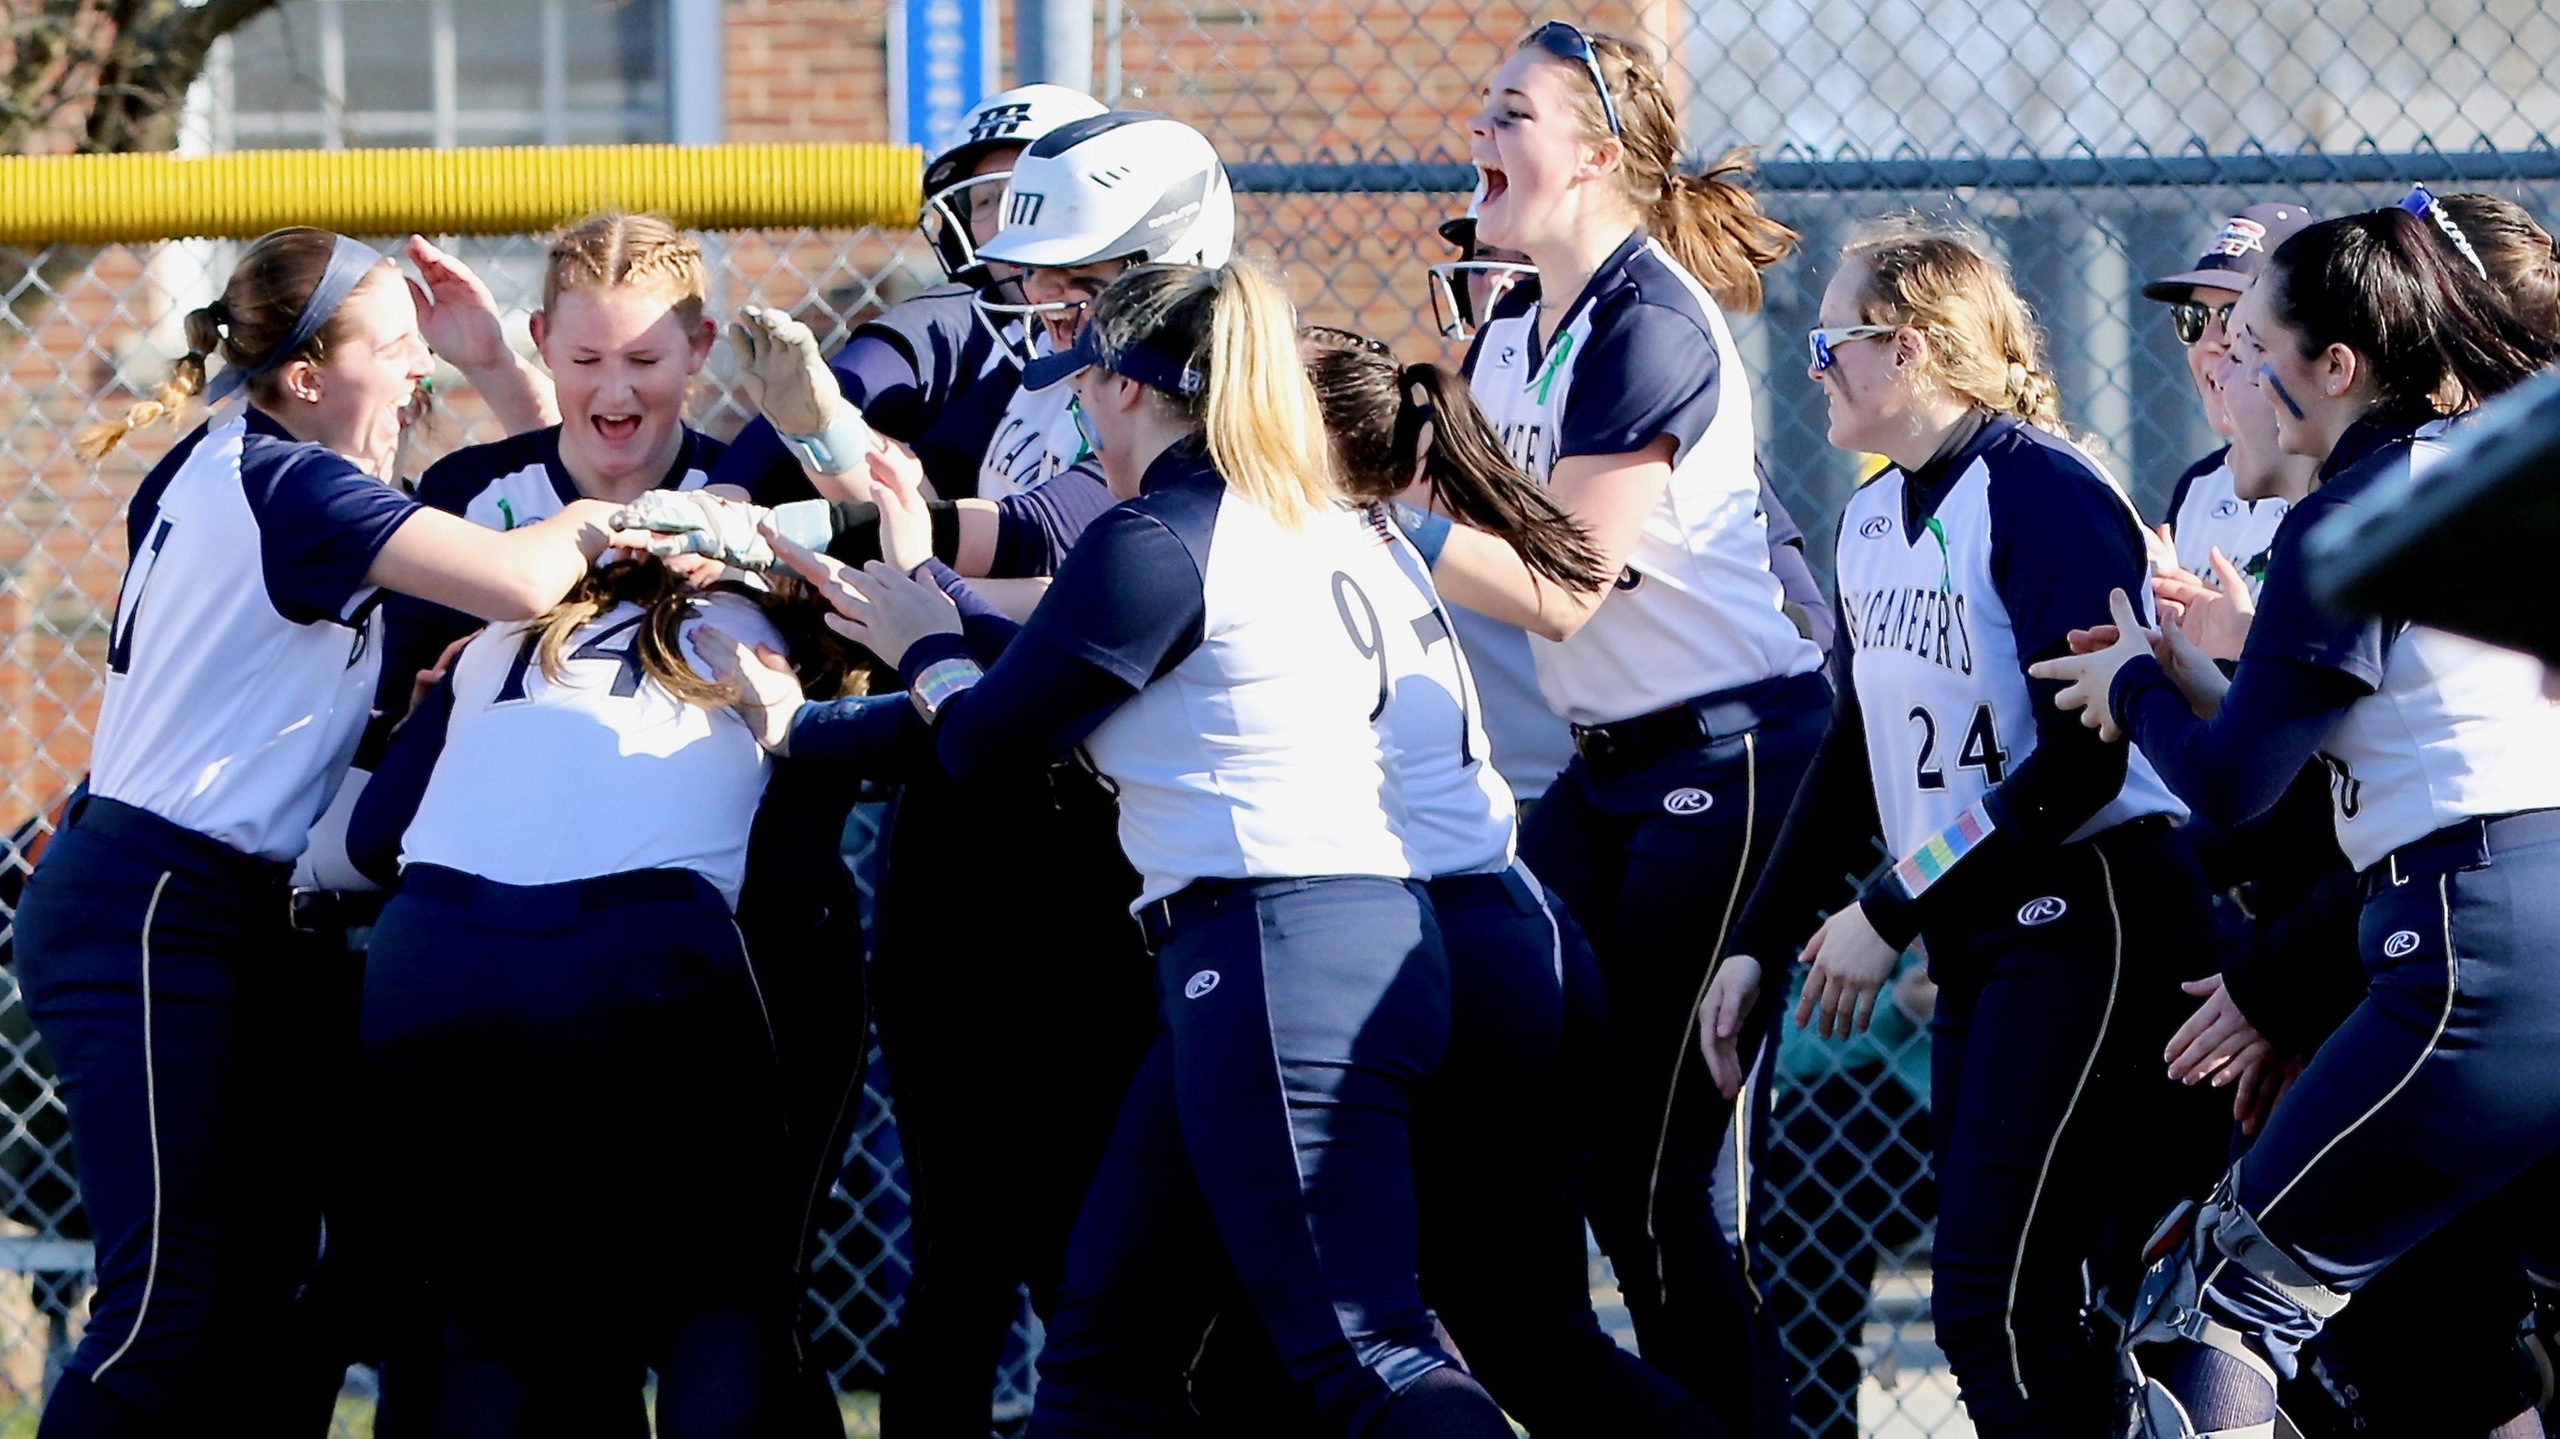 Softball Sweeps Pilgrims to Remain Undefeated